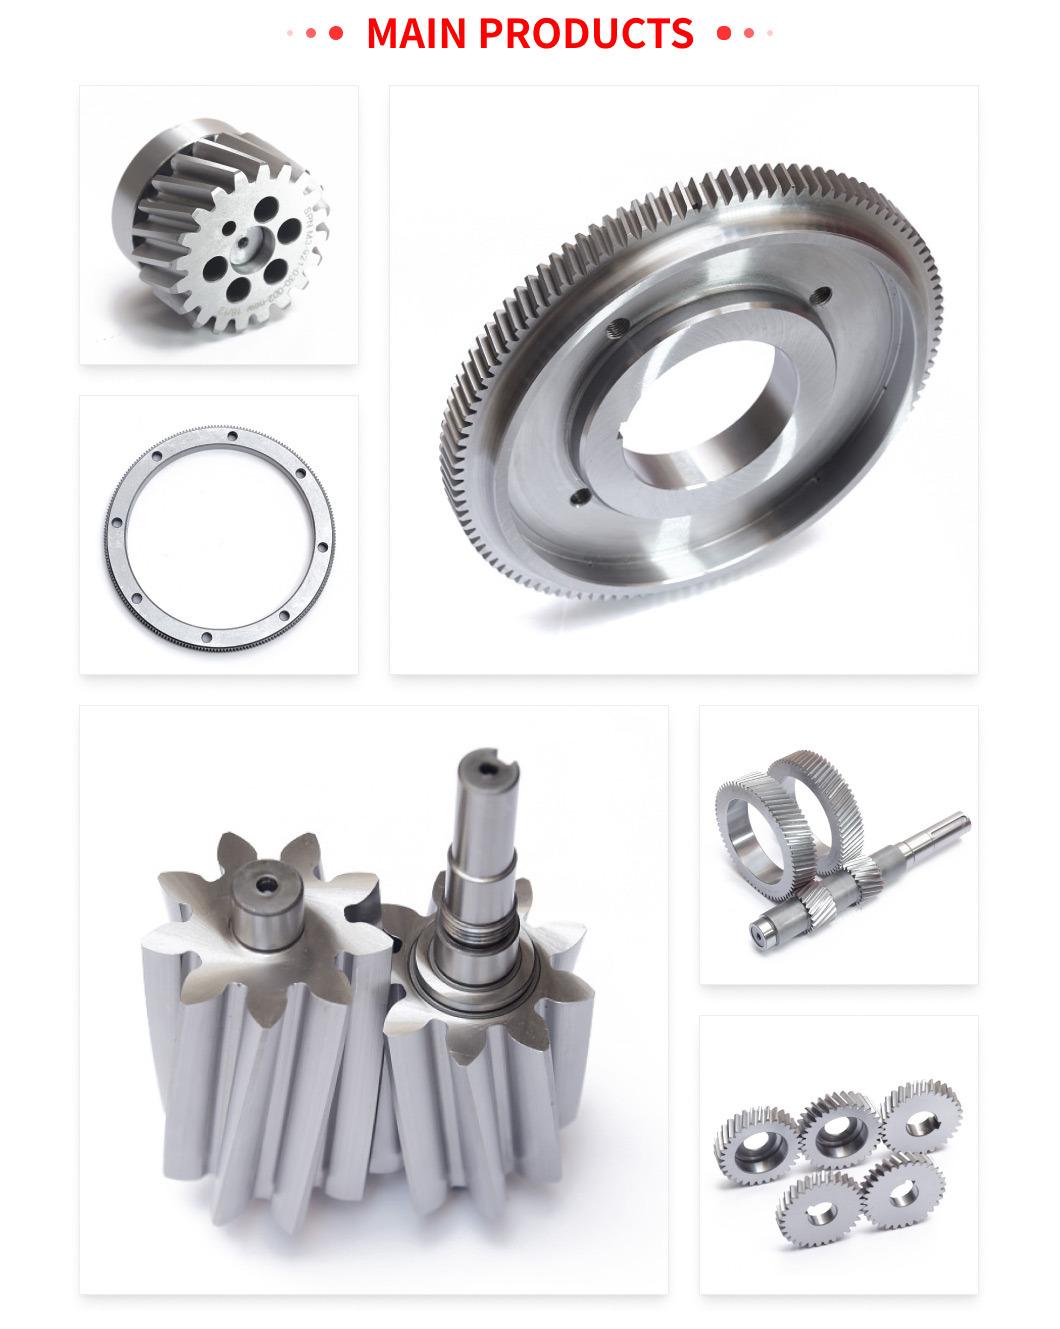 Motor Motorcycle OEM Cement Mixer Hunting Gears Transmission Gear with High Quality